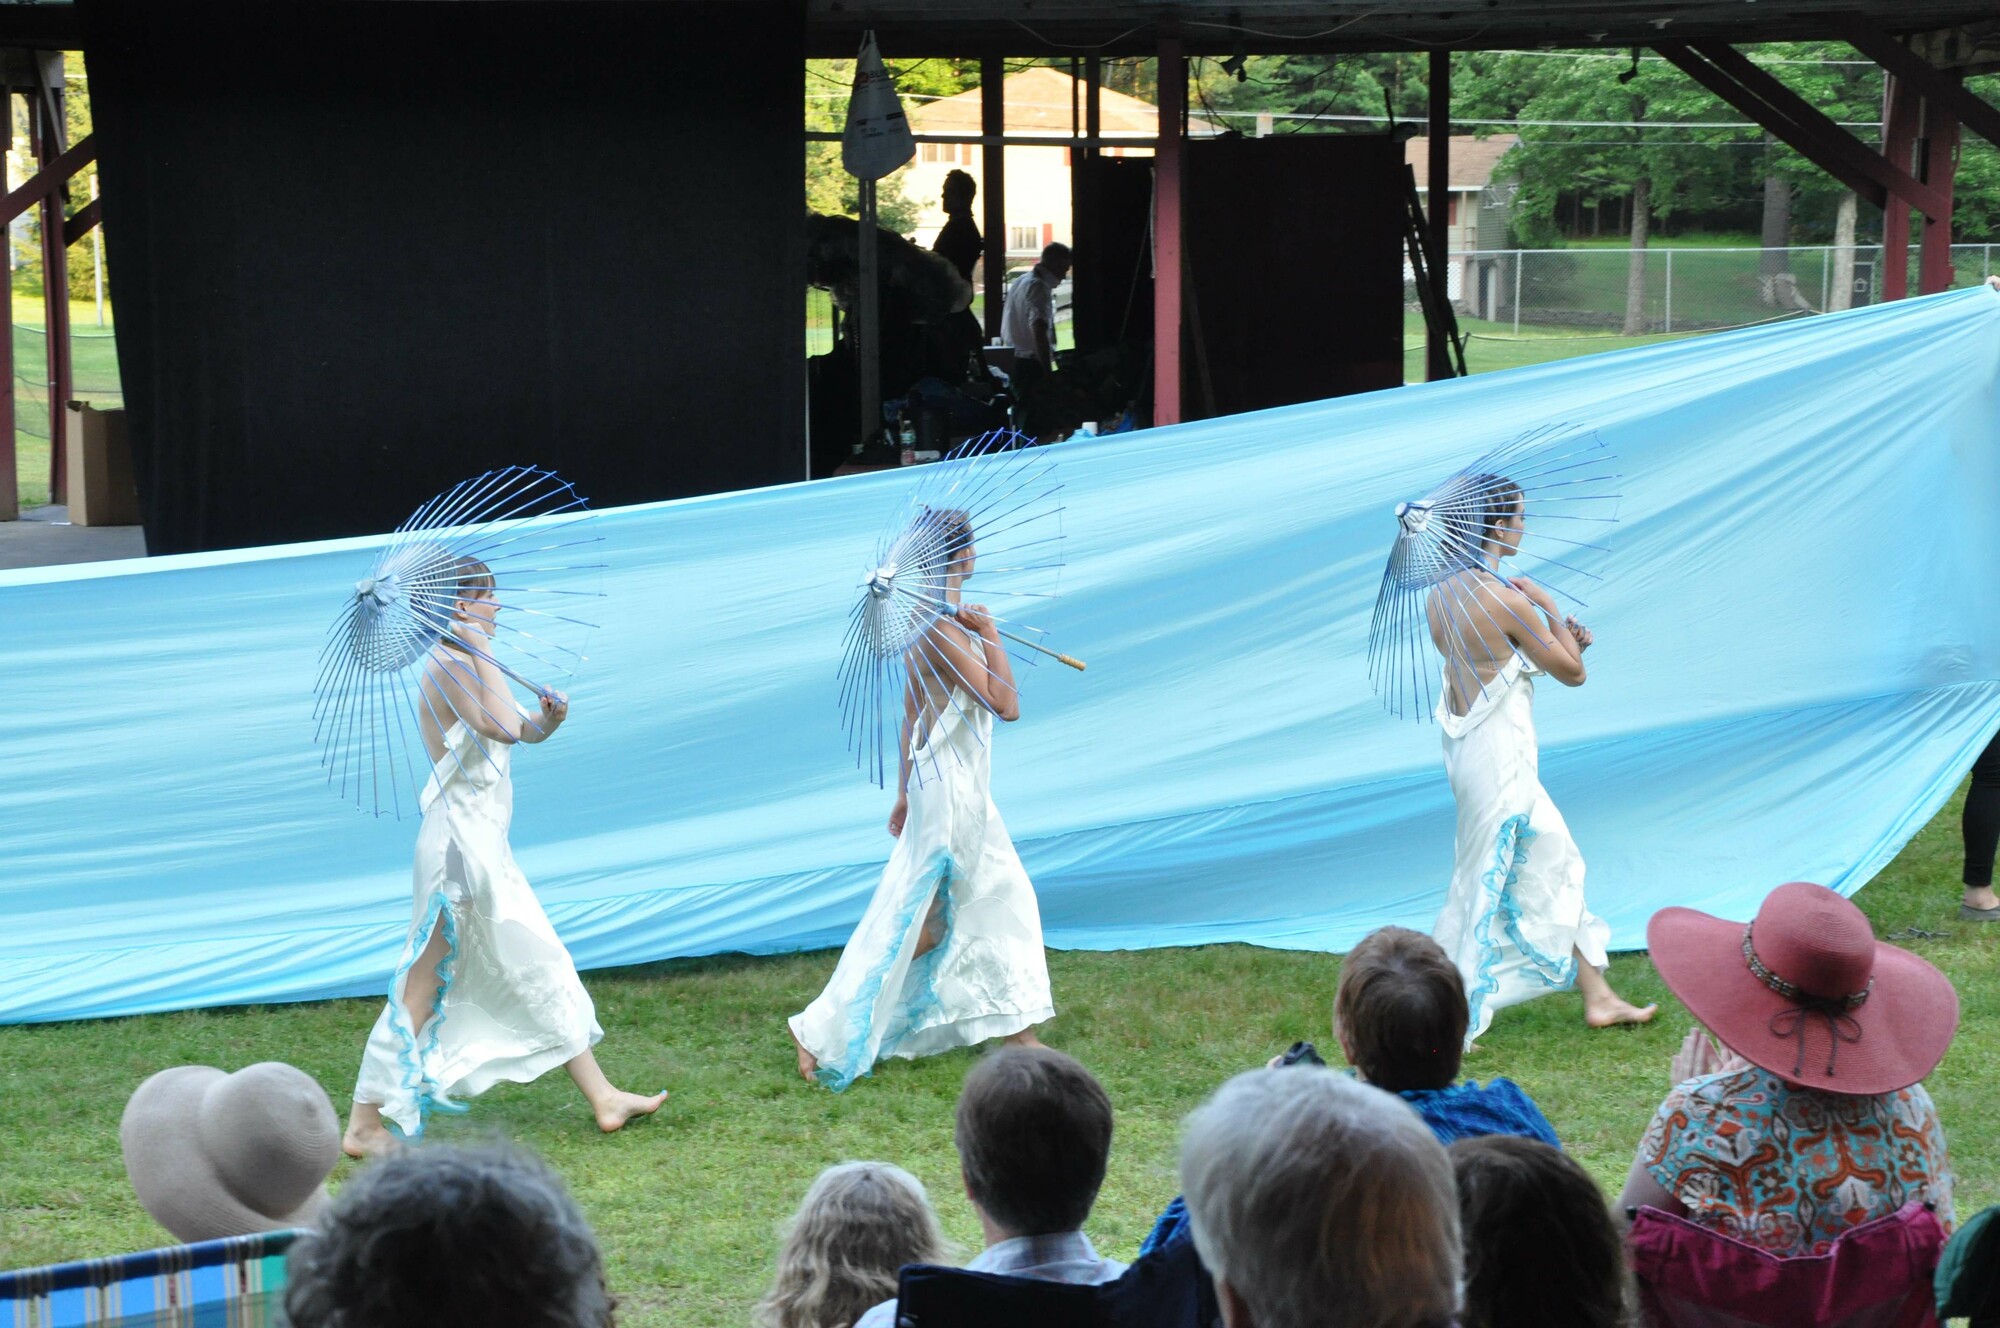 Three performers with mesh parasols walk in front of a large fabric sheet.